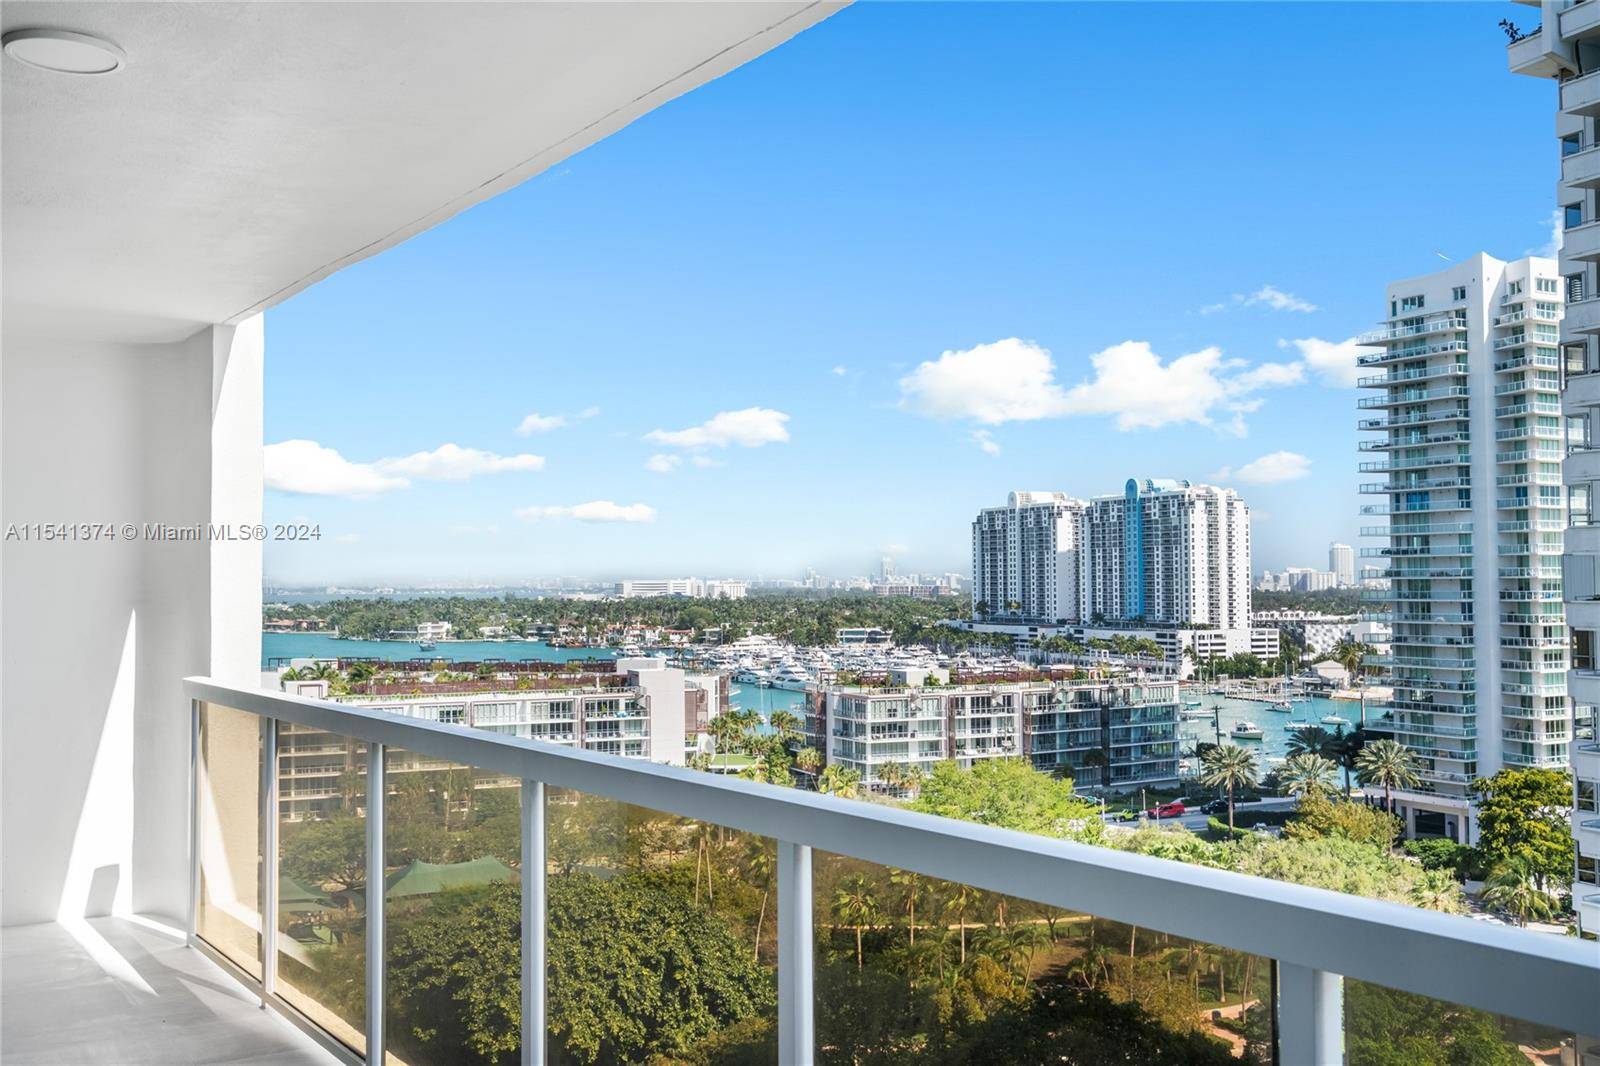 Spacious residence at 9 Island Condo 2 Bed, 2 Baths with an open terrace with views of the city and bay.